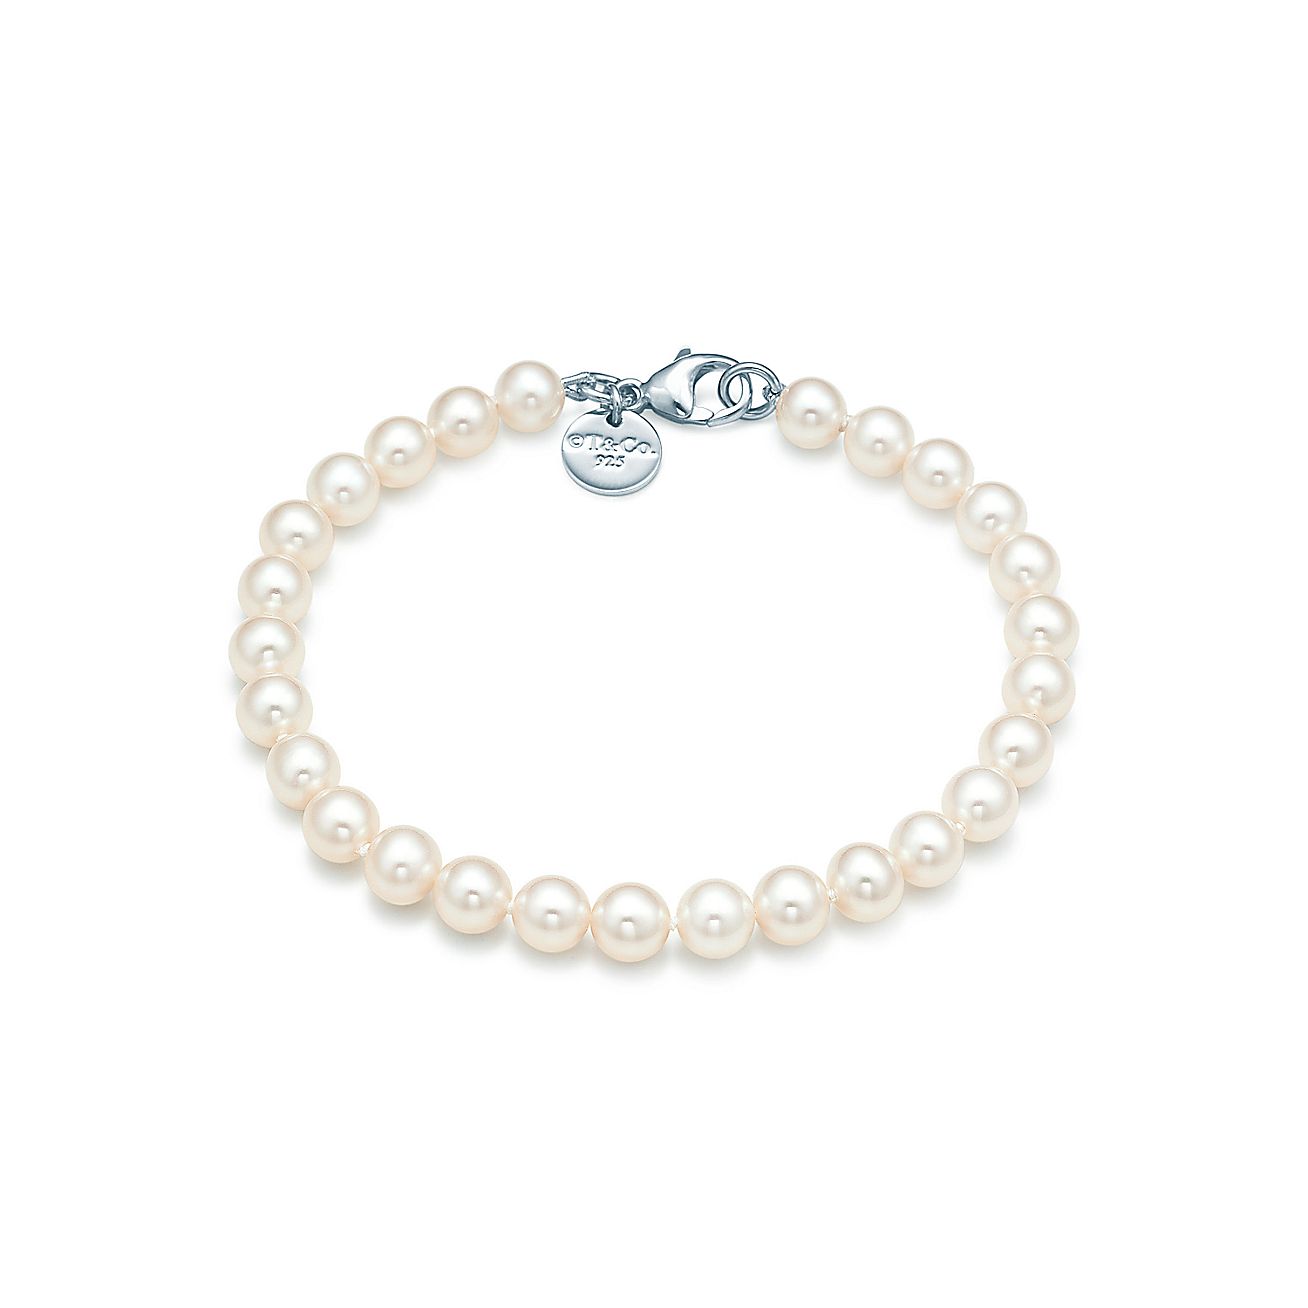 Ziegfeld Collection bracelet of freshwater cultured pearls with a ...